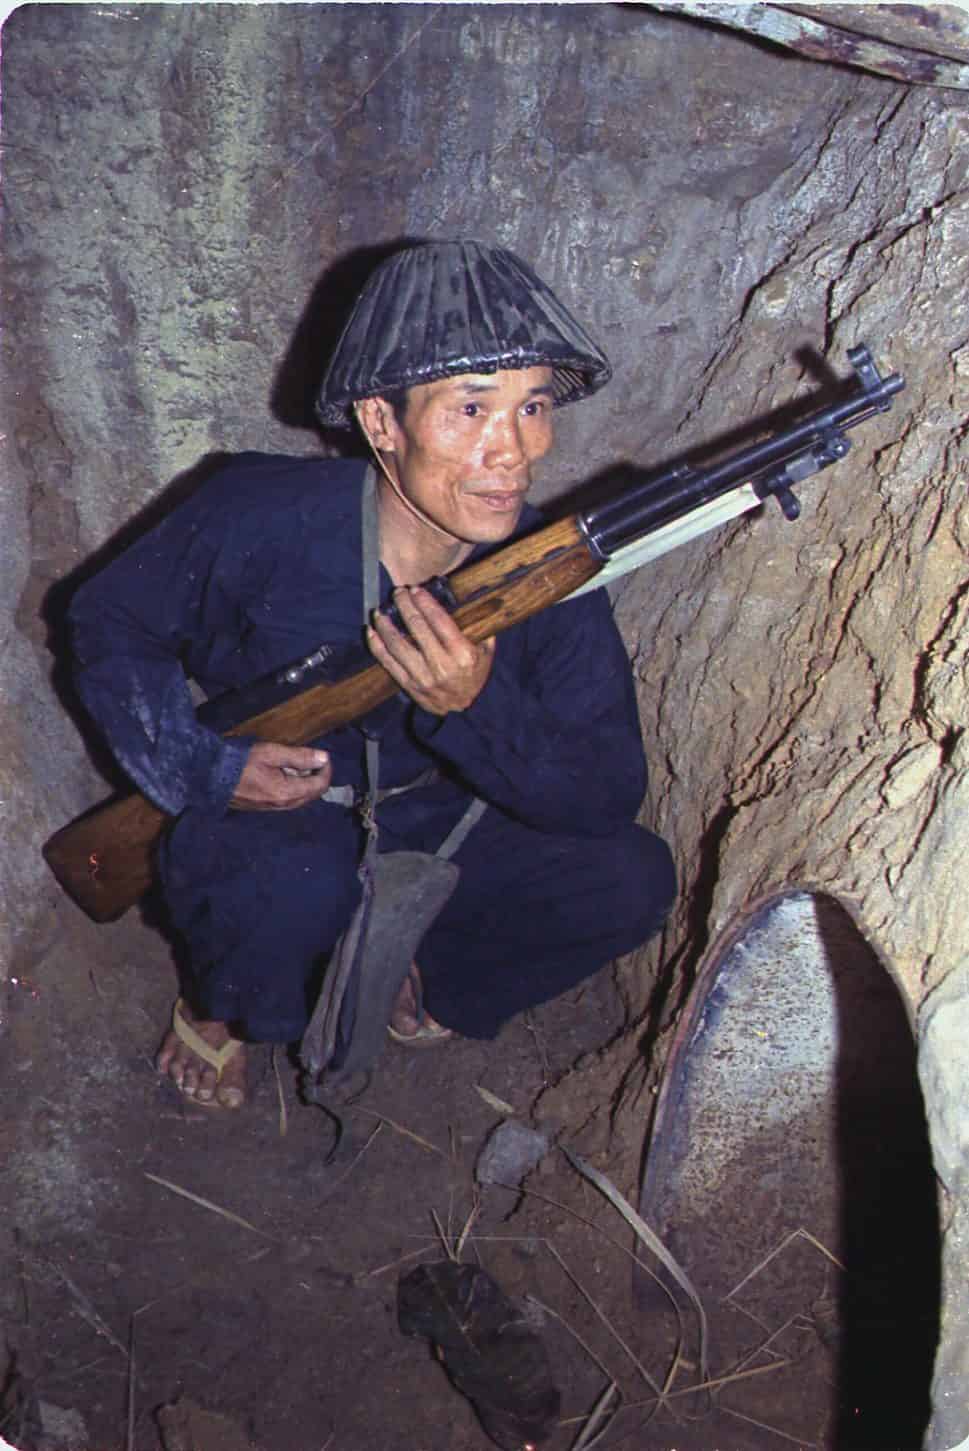 A Viet Cong soldier crouches in a bunker with an SKS rifle. A connecting tunnel is in the foreground